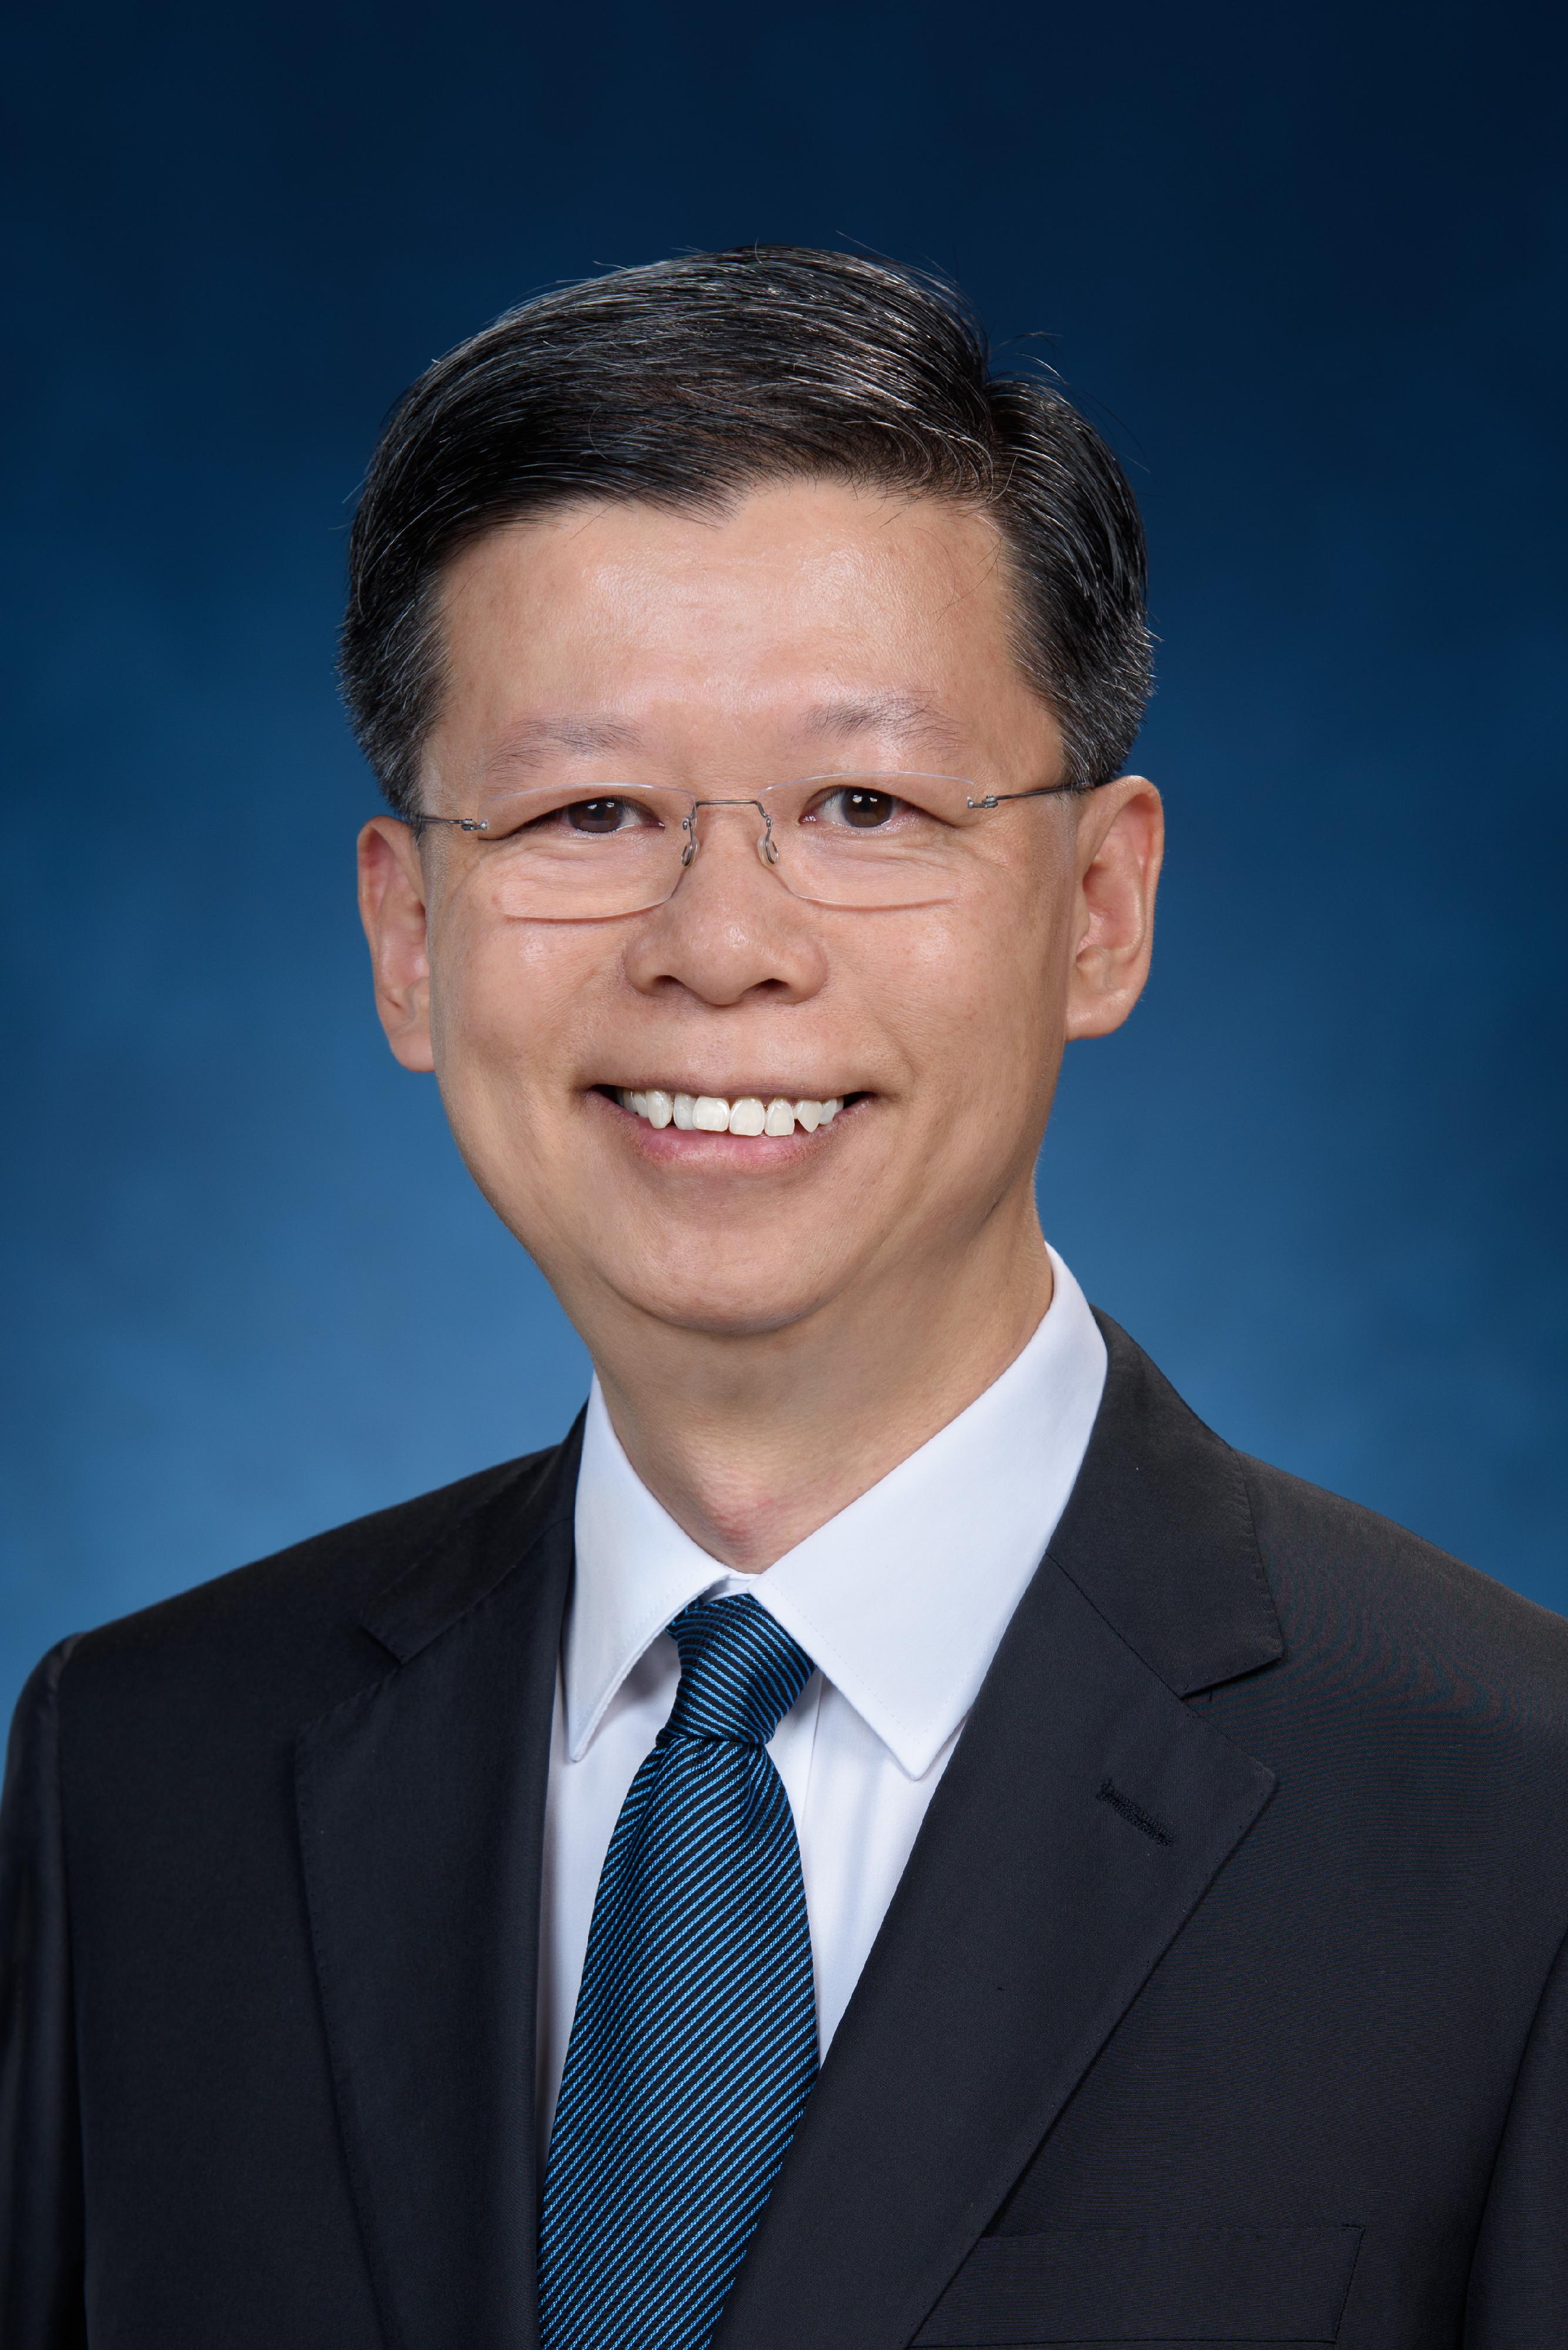 Mr Gordon Leung Chung-tai, Director of Social Welfare, will commence his pre-retirement leave on August 10, 2022.